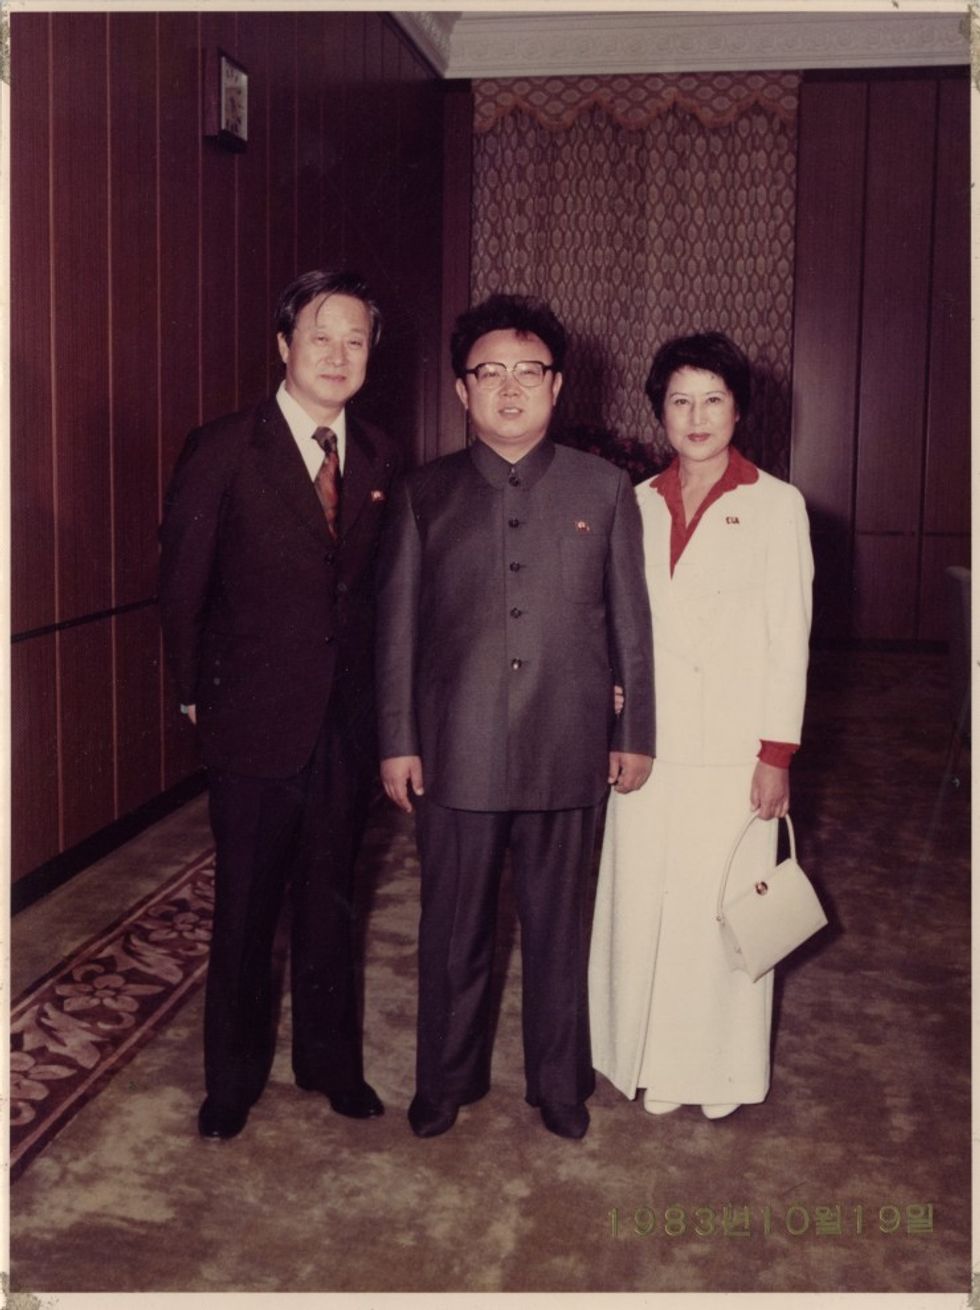 Kim Jong-Il with Shin Sang-ok and Choi Euh-hee in Berlinale selection The Lovers and the Despot.